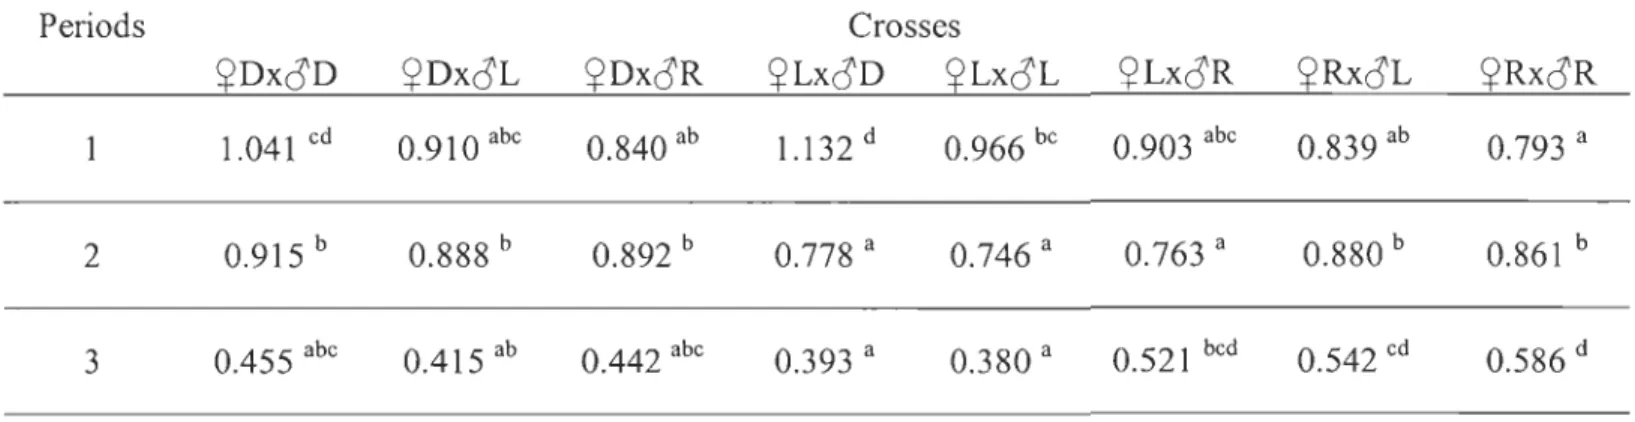 Table 6.  Specifie growth rates  for  ail  cross-types,  from  hatching to  yolk  sac resorption  (l) ,  from  yolk  sac resorption  to  15  weeks  of exogenous  feeding  (2) , and  from  15  weeks  of exogenous  feeding  to  2136  degree-days  (3) 